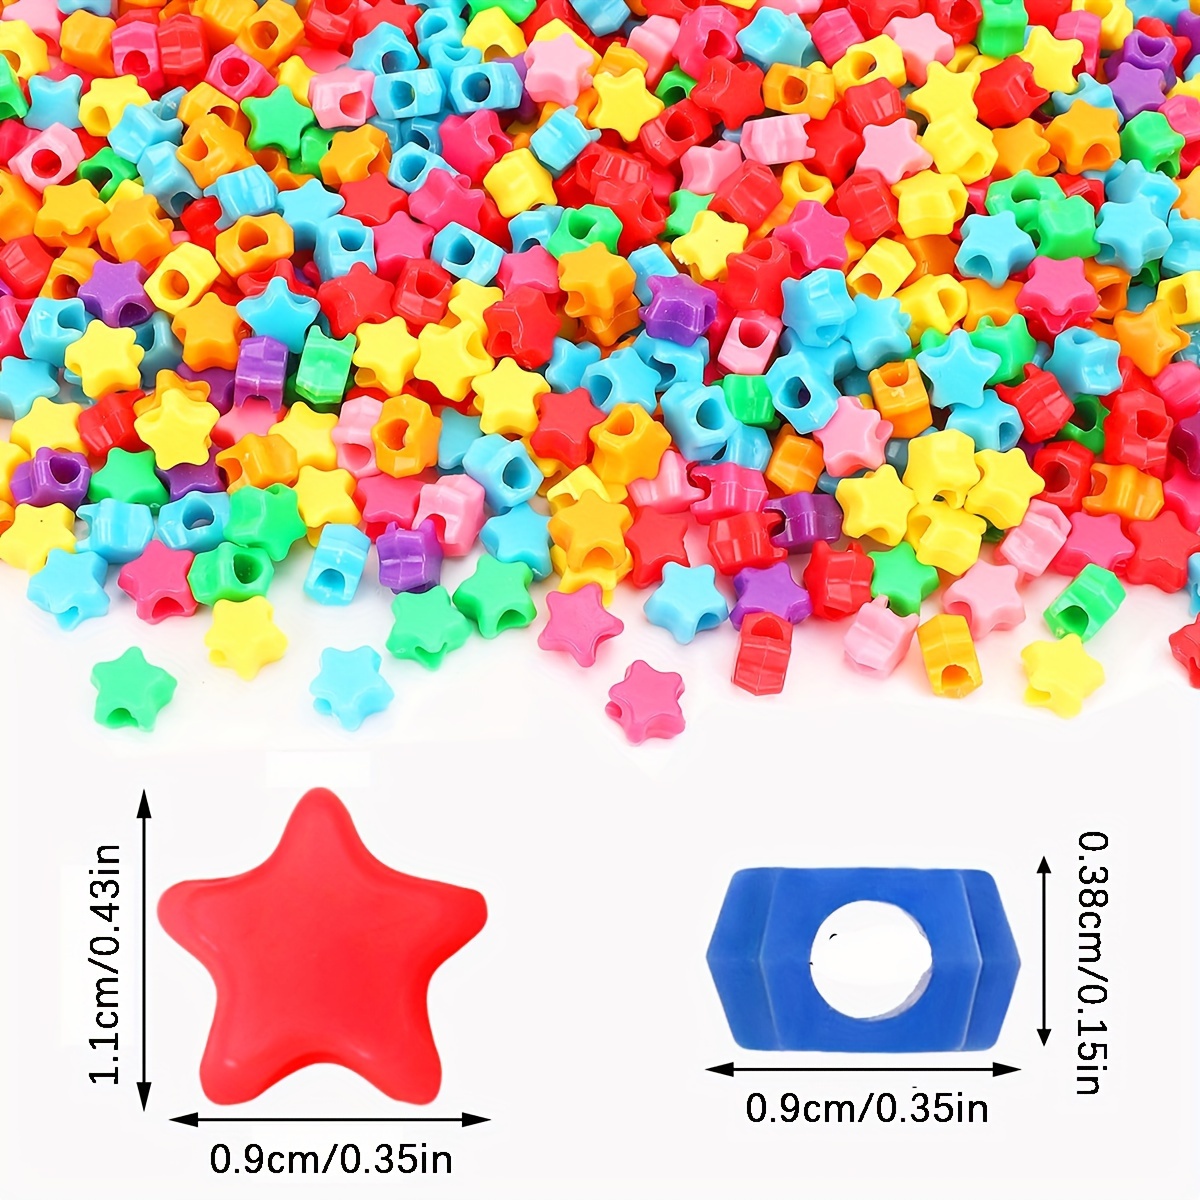 

500/1000pcs Rainbow Star Beads - Large Hole Spacer Beads For Diy Jewelry, Friendship Bracelets & Crafts - Vibrant Colors For 4th Of July & Pride Party Decorations